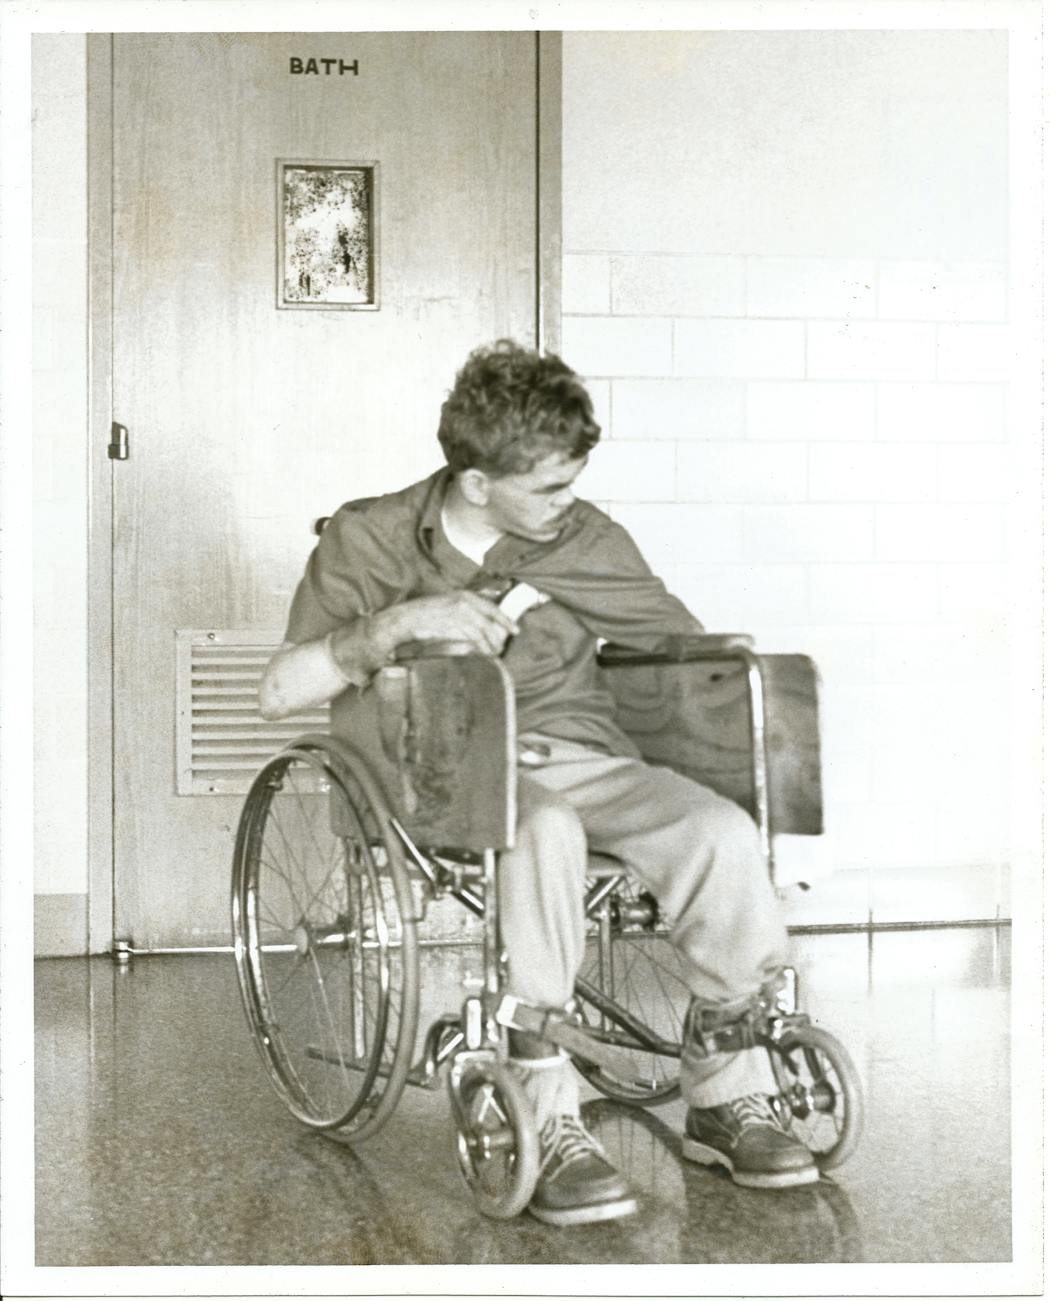 A boy in an institution, strapped to a wheelchair, spent most of his time in restraints.